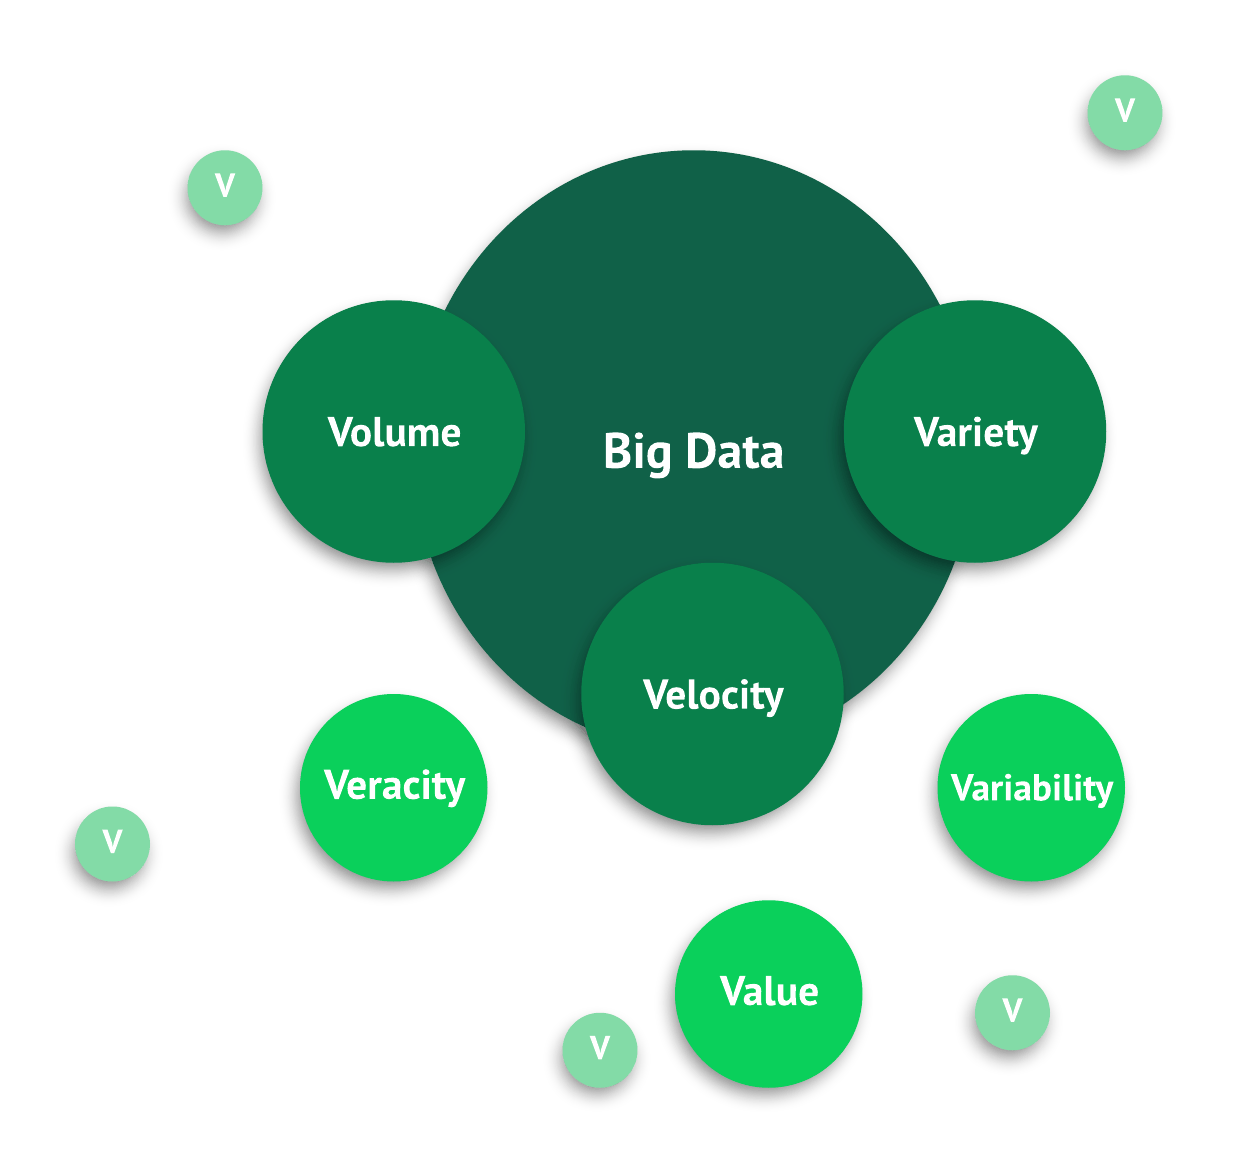 The Vs of big data are variety, velocity, and volume.